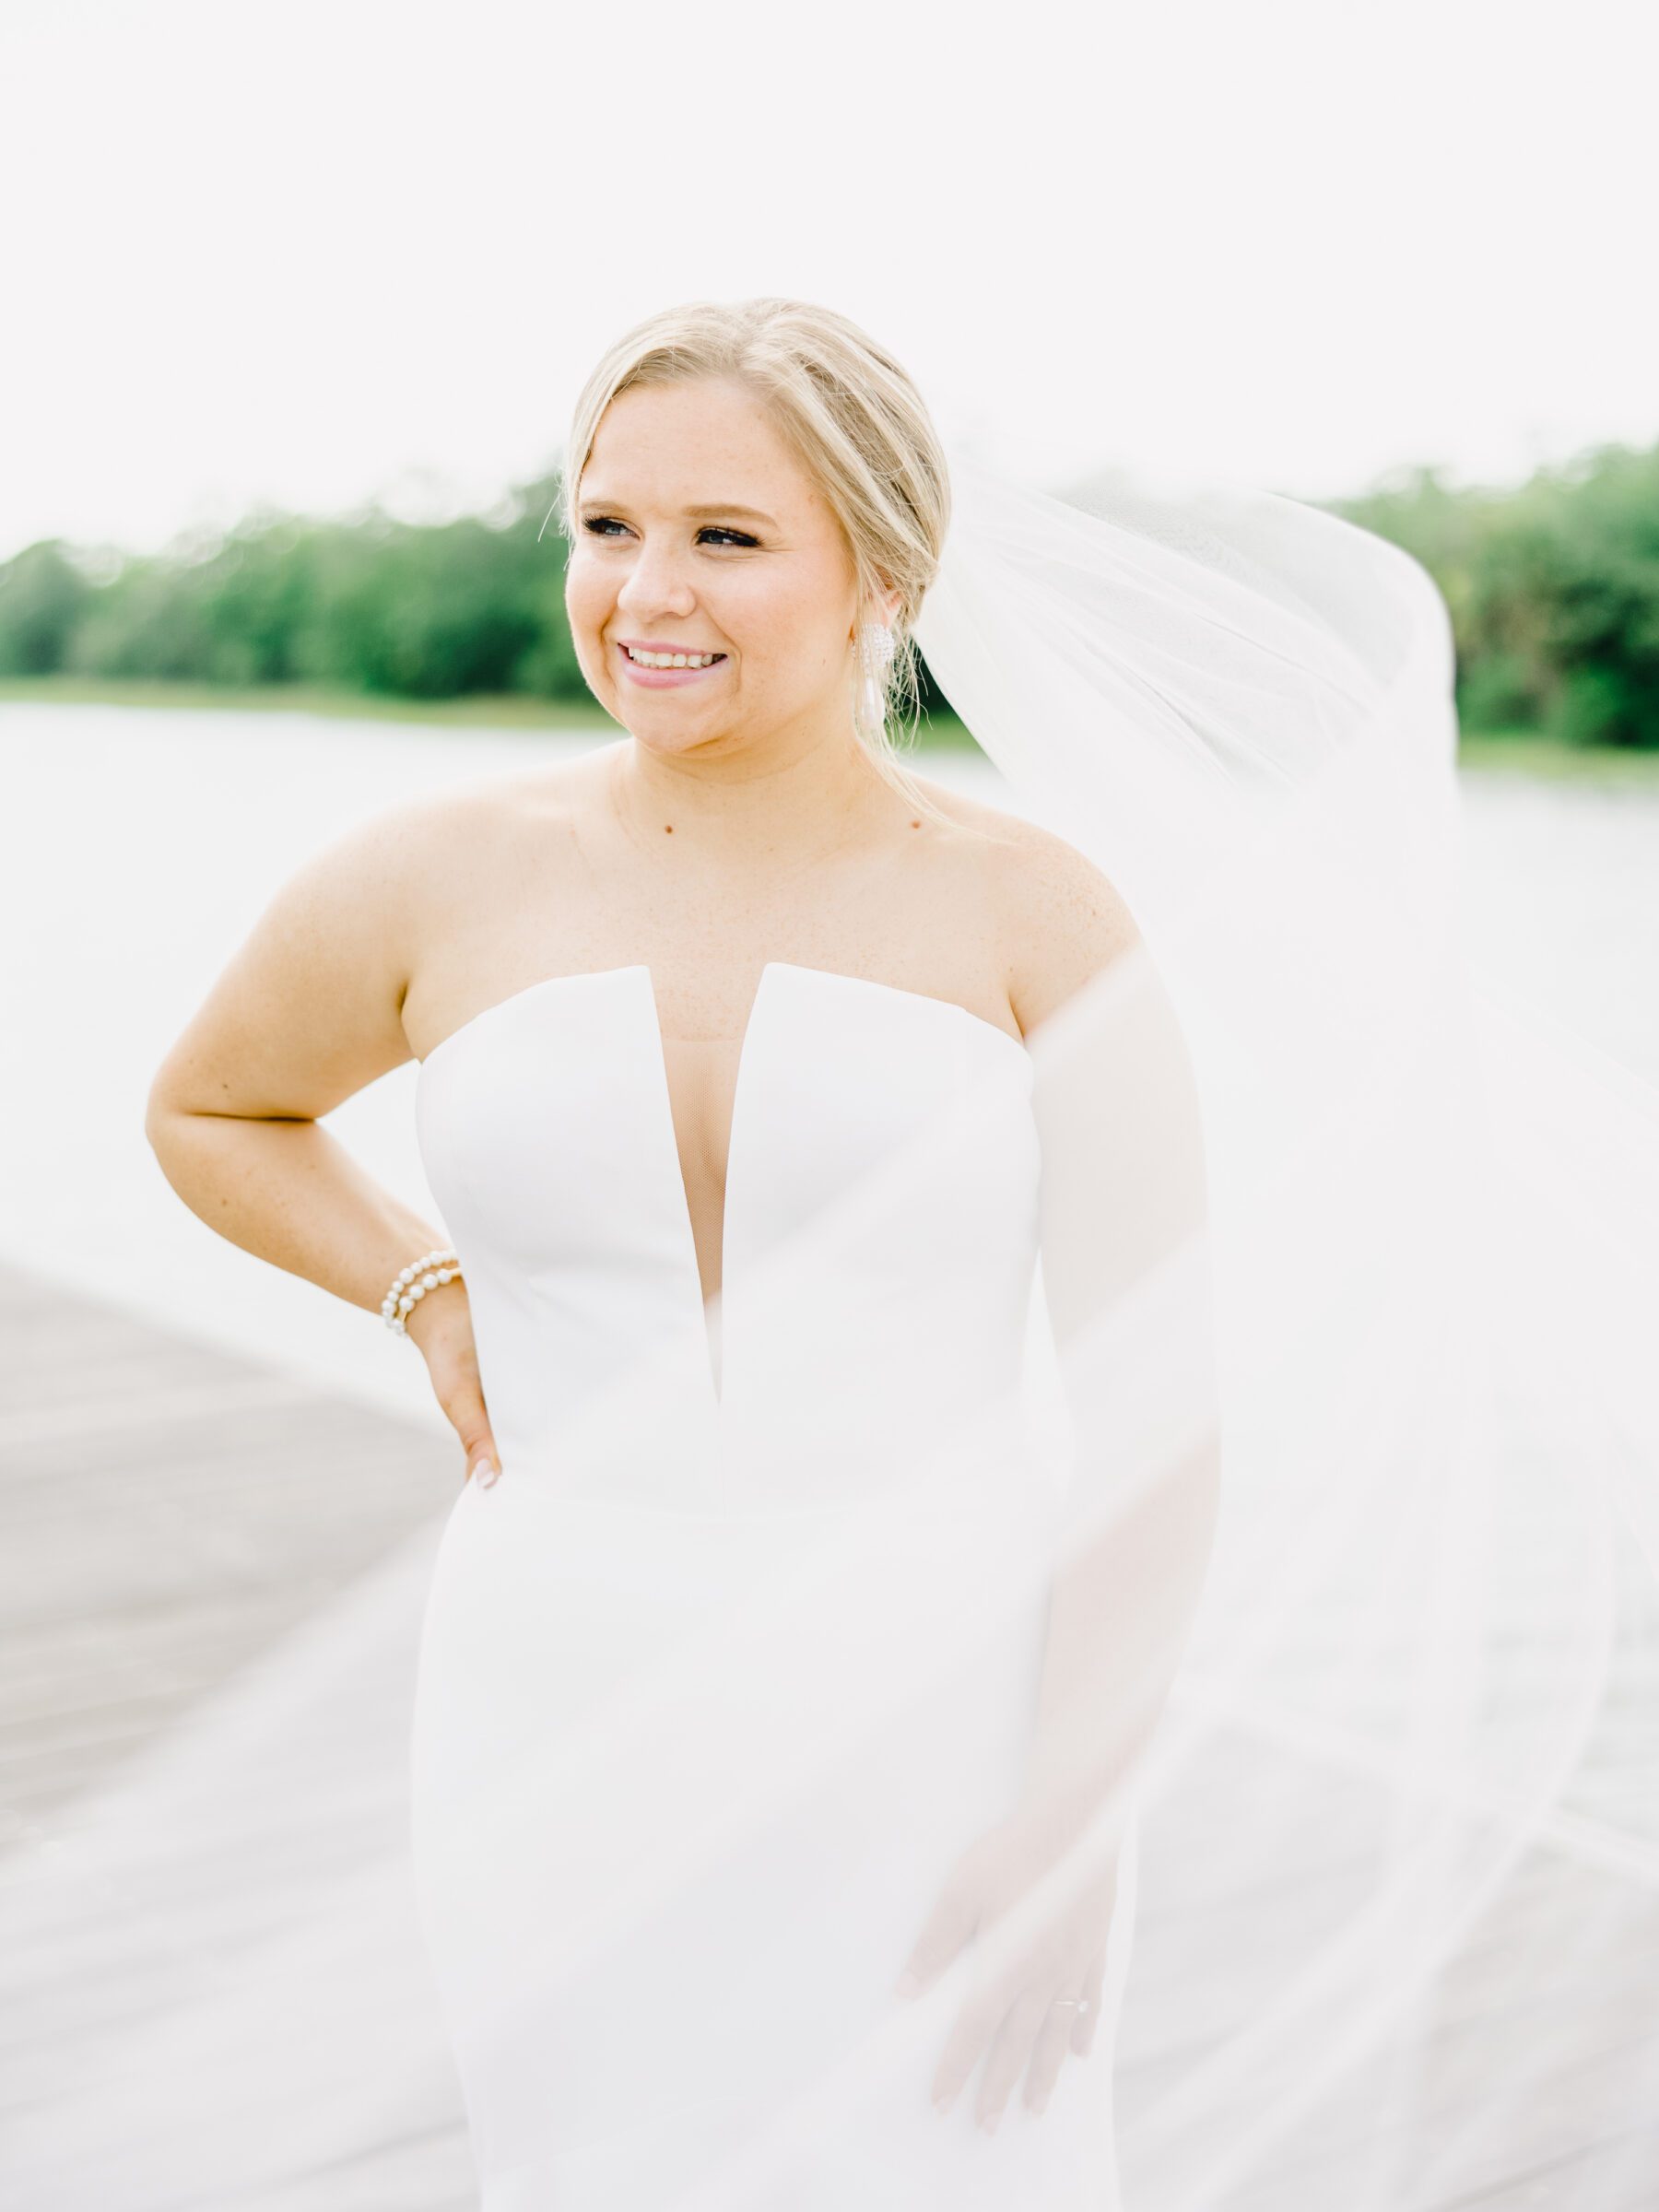 A beautiful, smiling bride with her veil flowing in the breeze at her Citadel docks bridal session